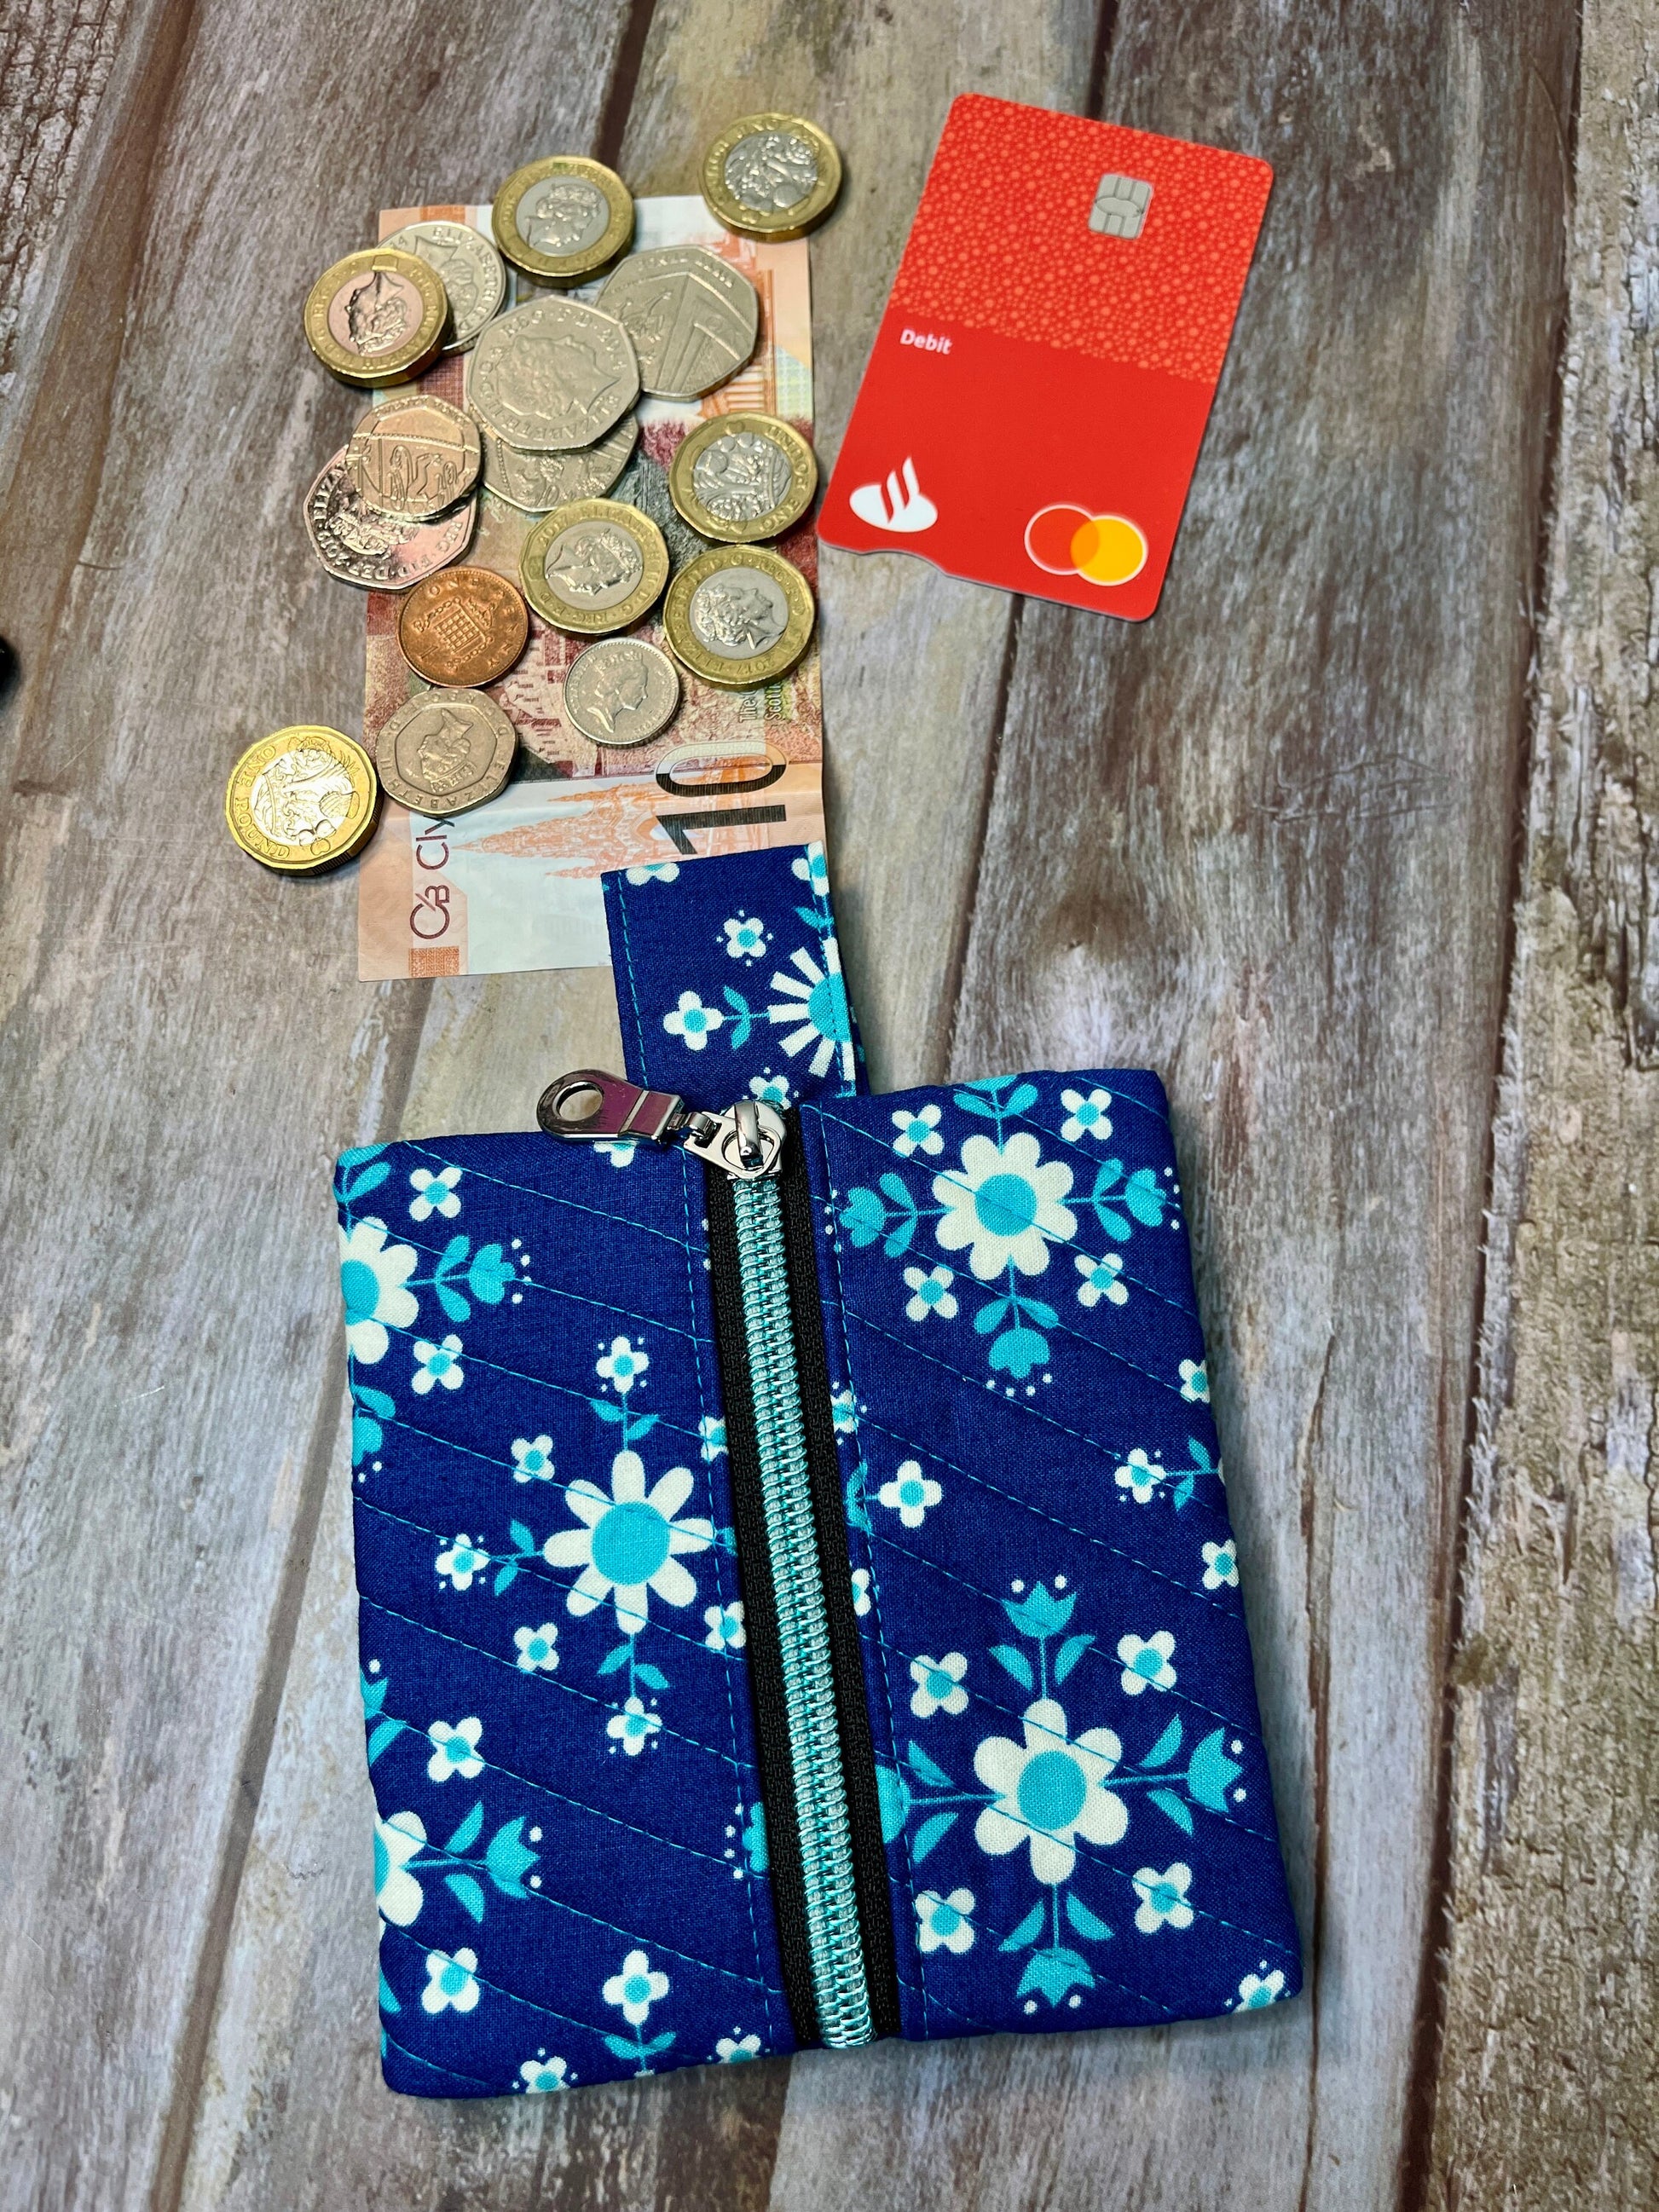 Blue Floral quilted Mini Zip Pouch, Coin Purse, Keyring Purse, Emergency Kit, Girls Purse, Blue Turquoise Pouch - Uphouse Crafts